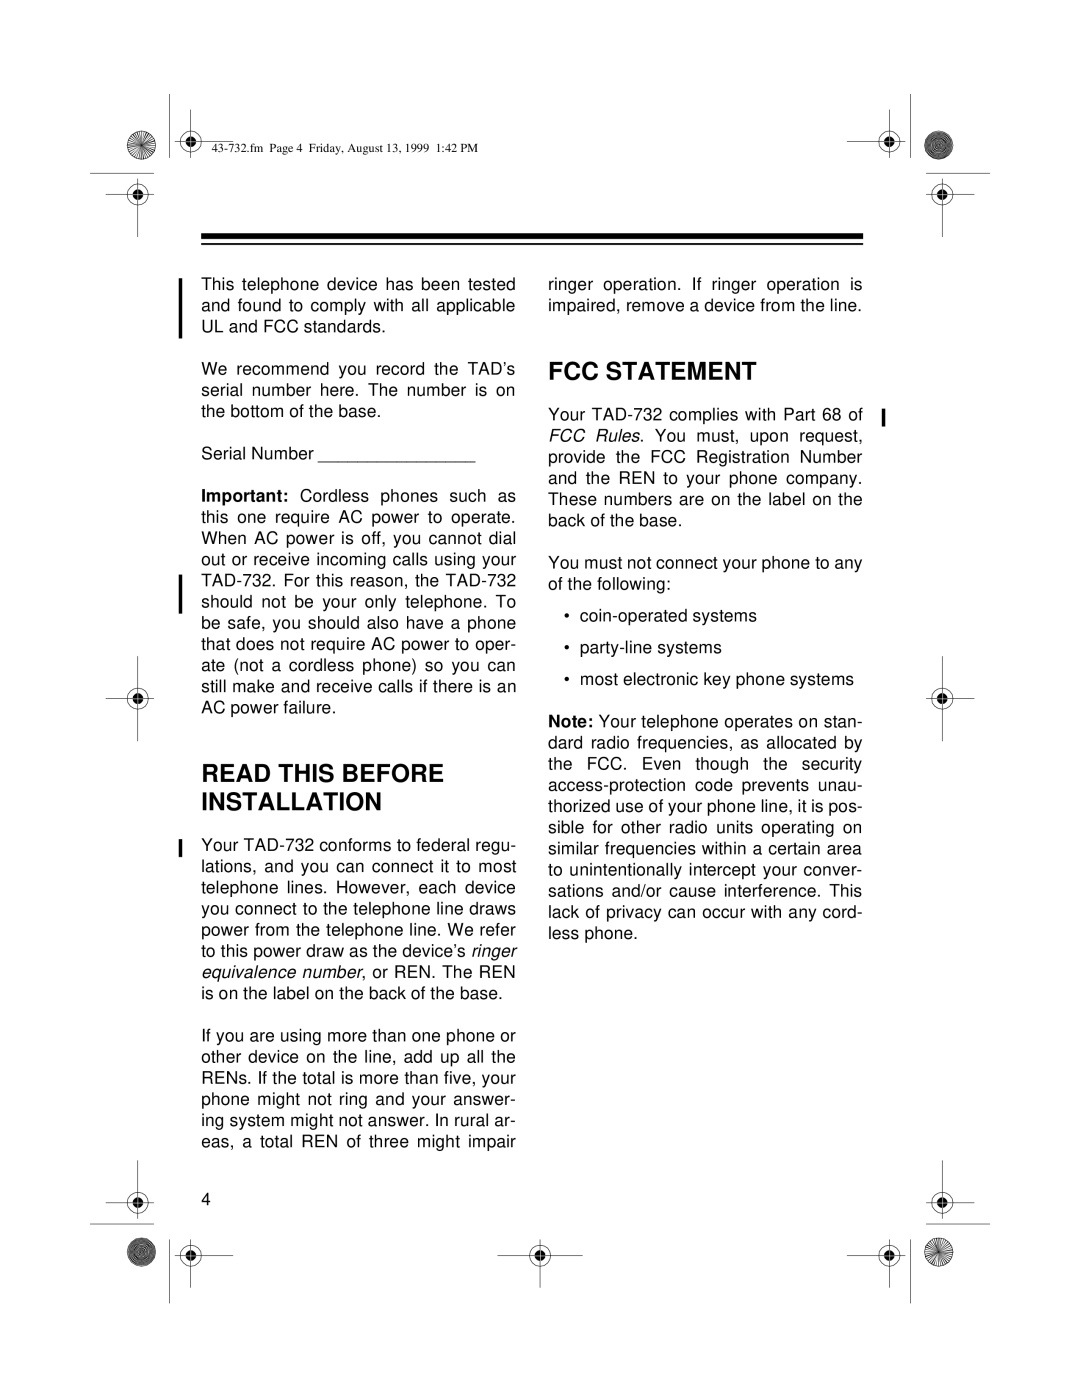 GE TAD-732 owner manual Read this Before Installation, FCC Statement 